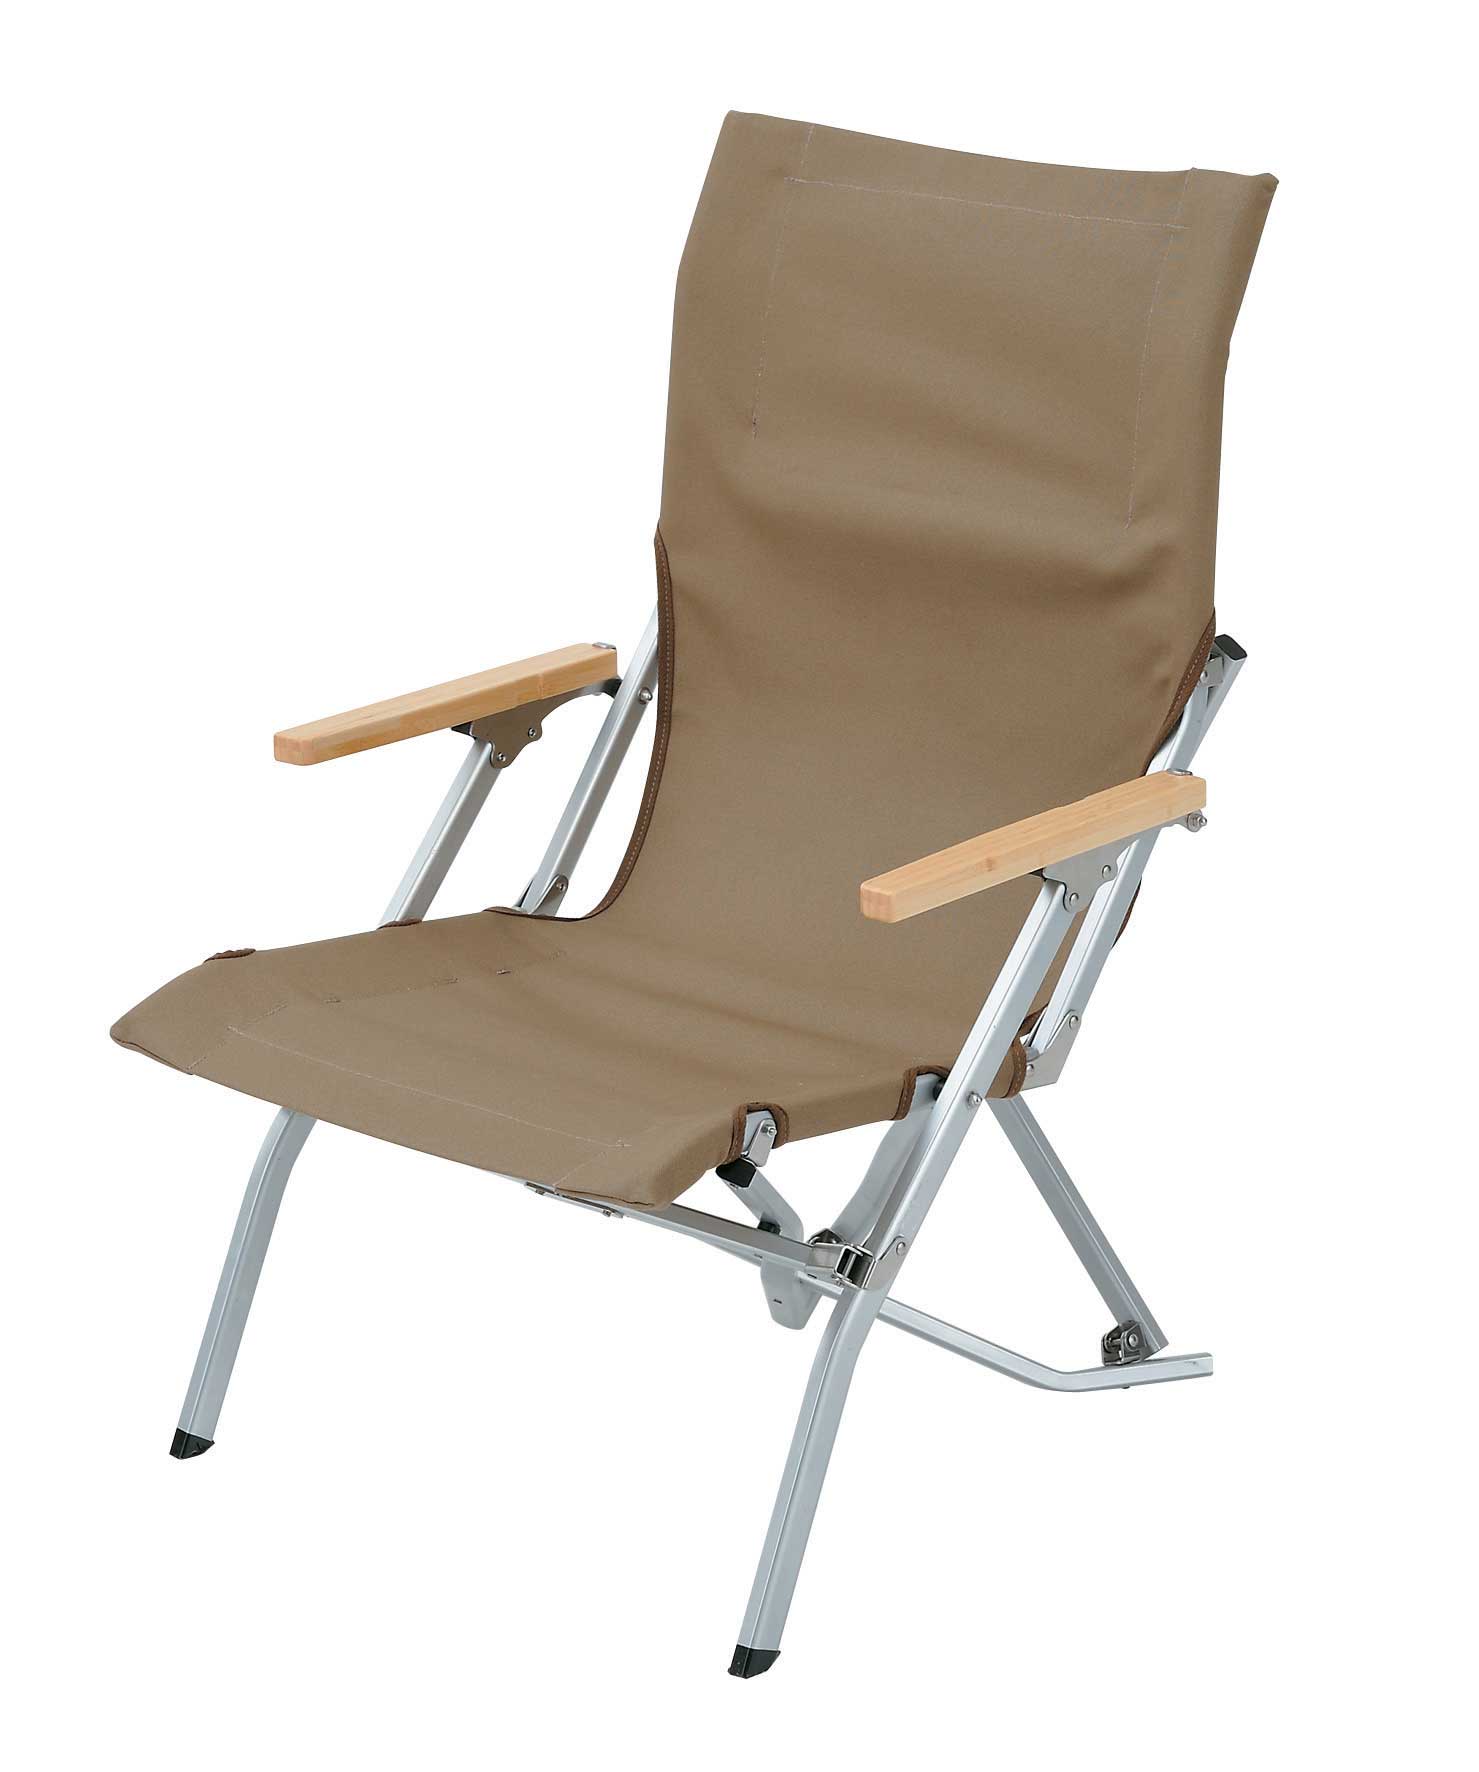 Canvas Folding Chair Benefits for Home Office